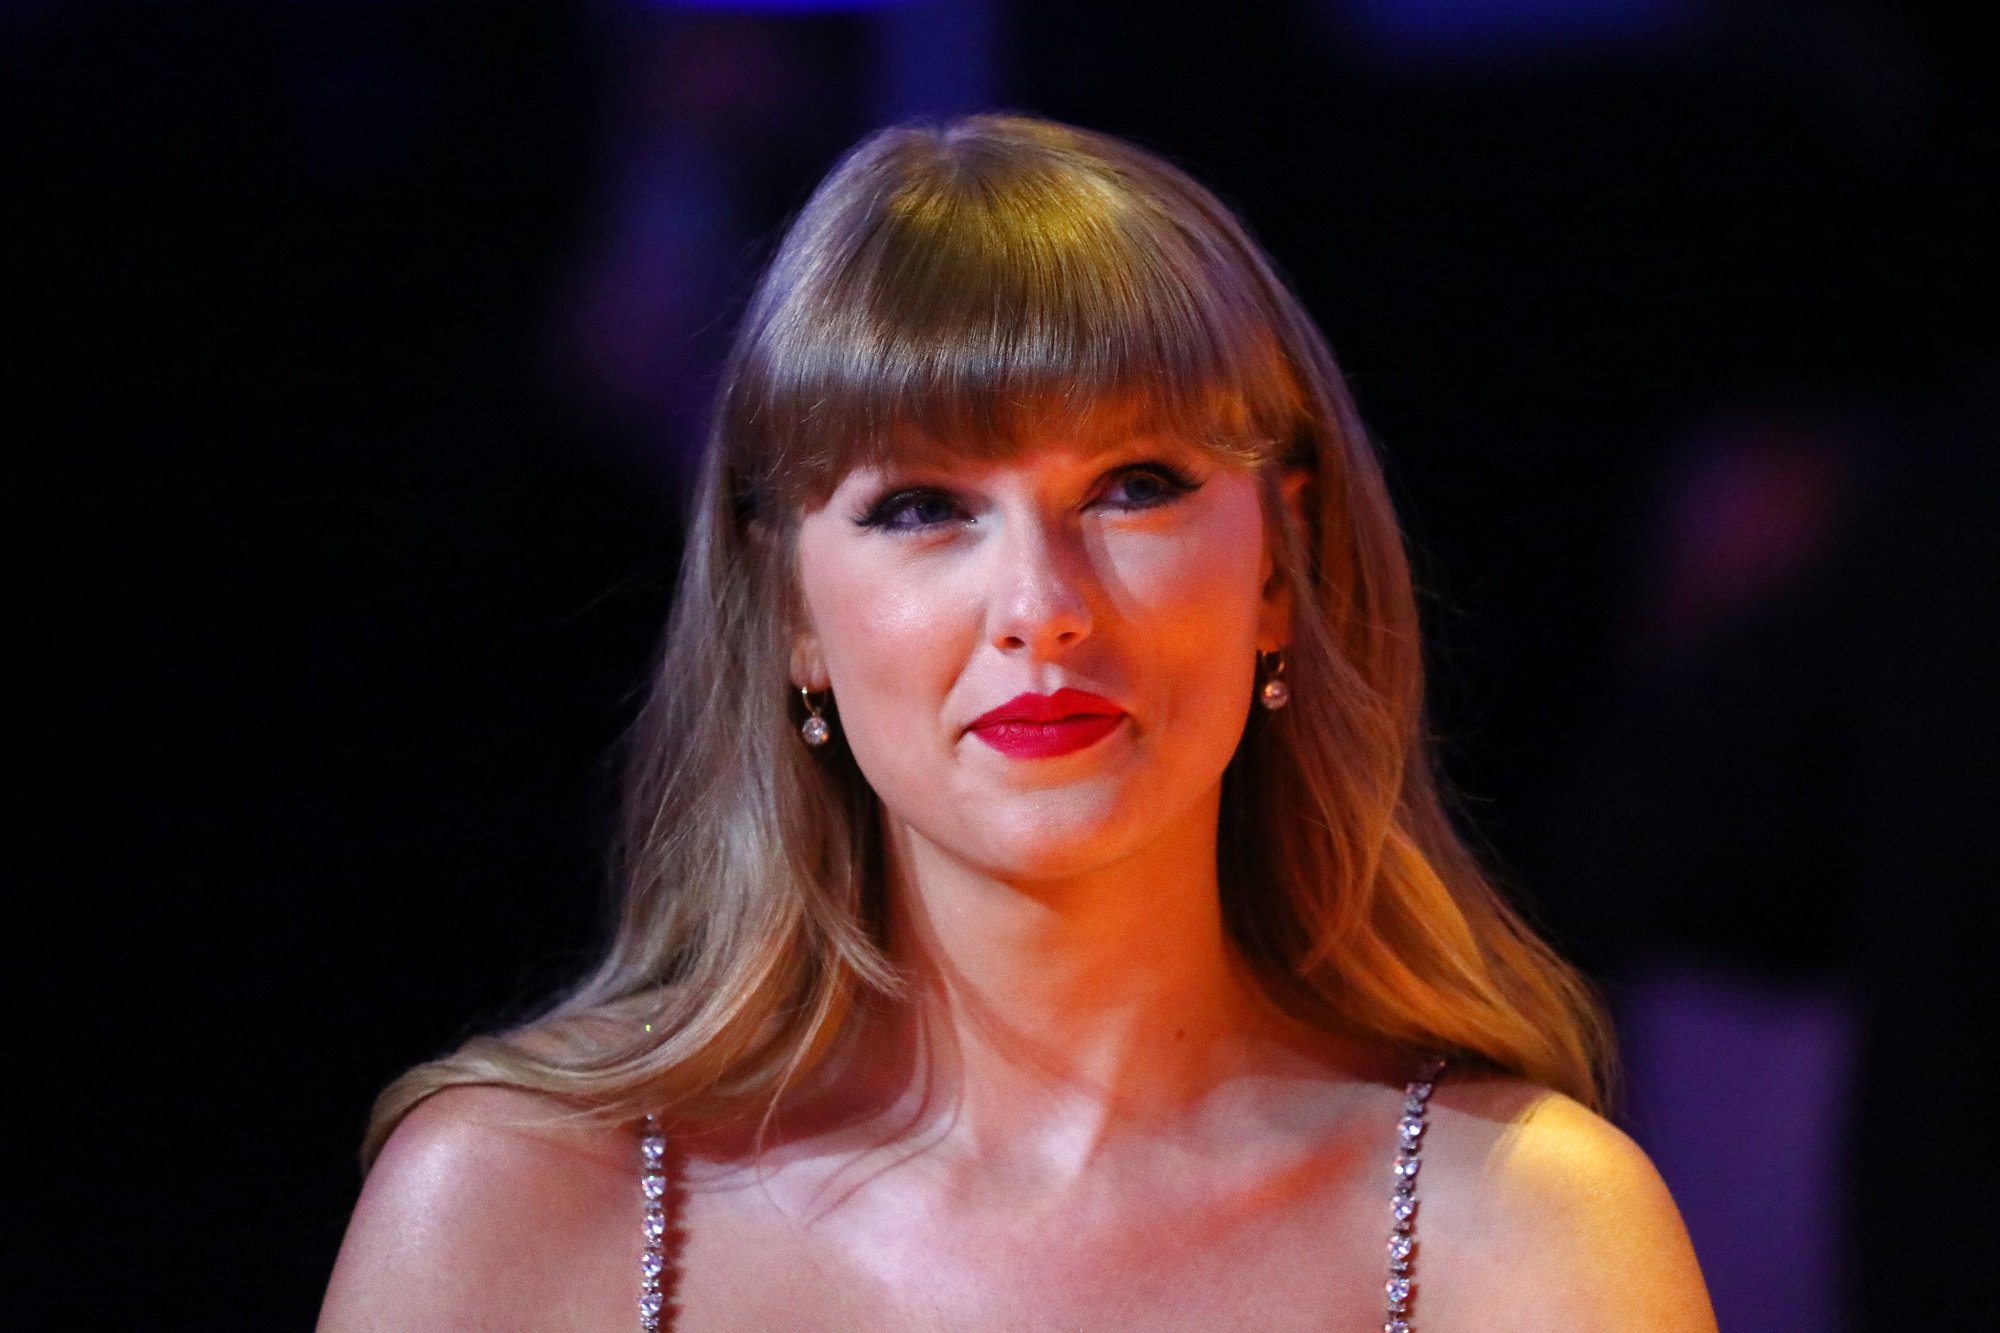 A close up of Taylor Swift smiling at The BRIT Awards 2021